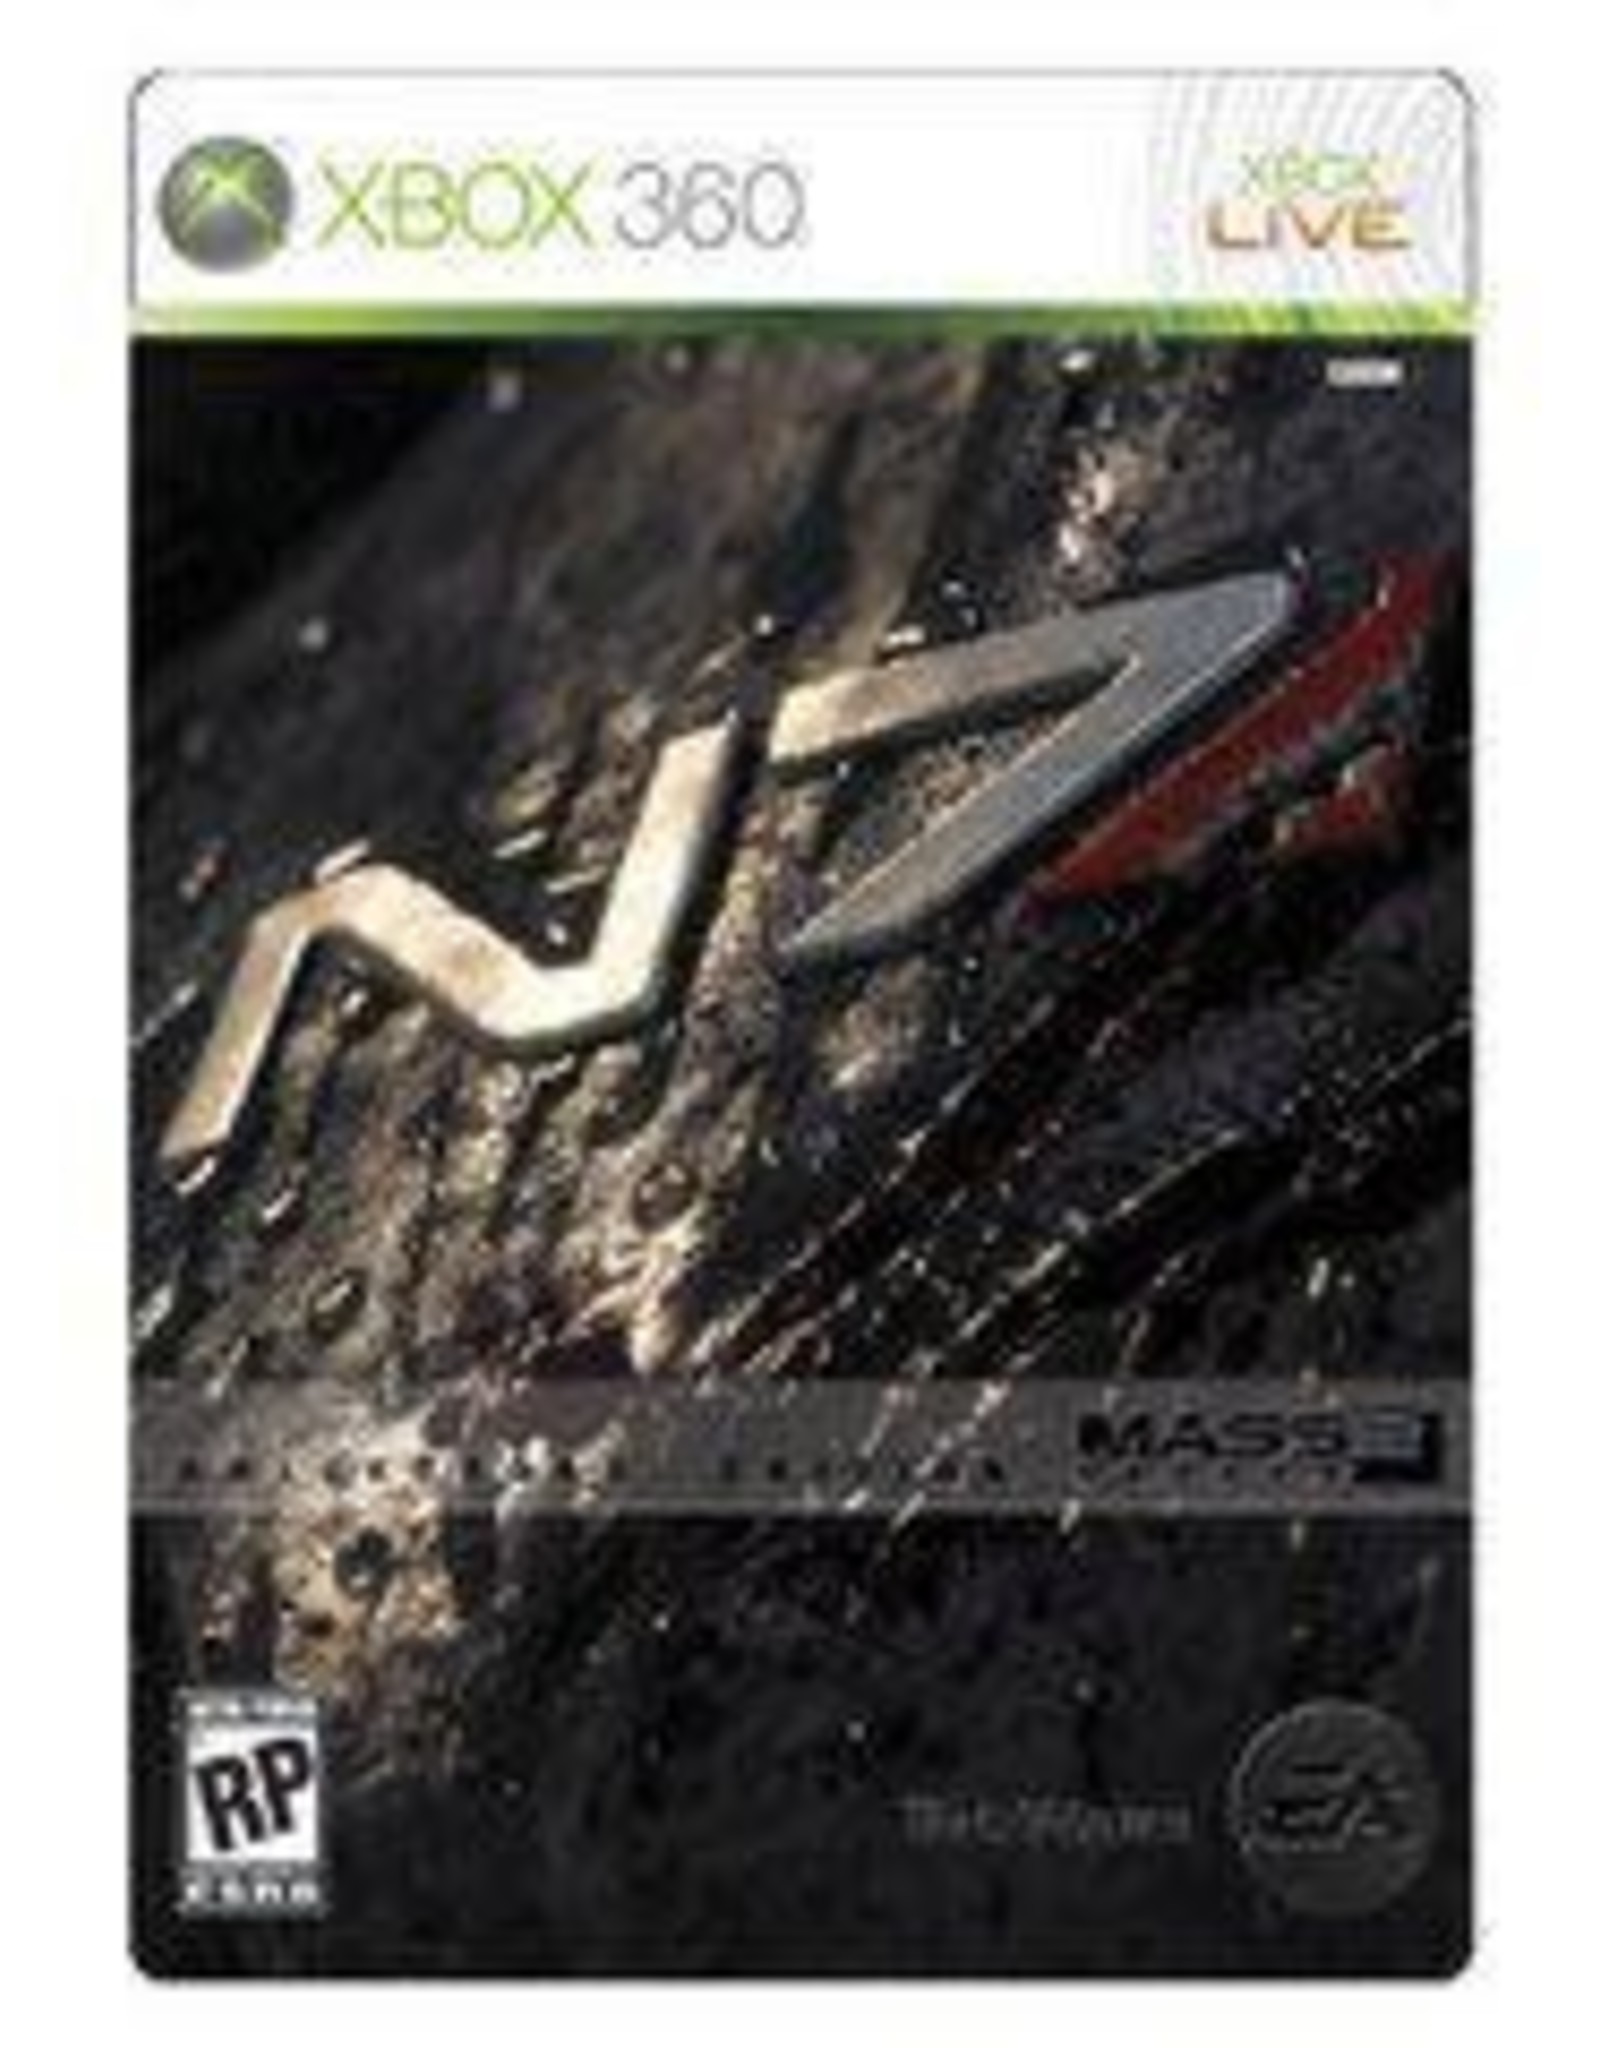 Xbox 360 Mass Effect 2 Collector's Edition (CiB, Damaged Outer Box)